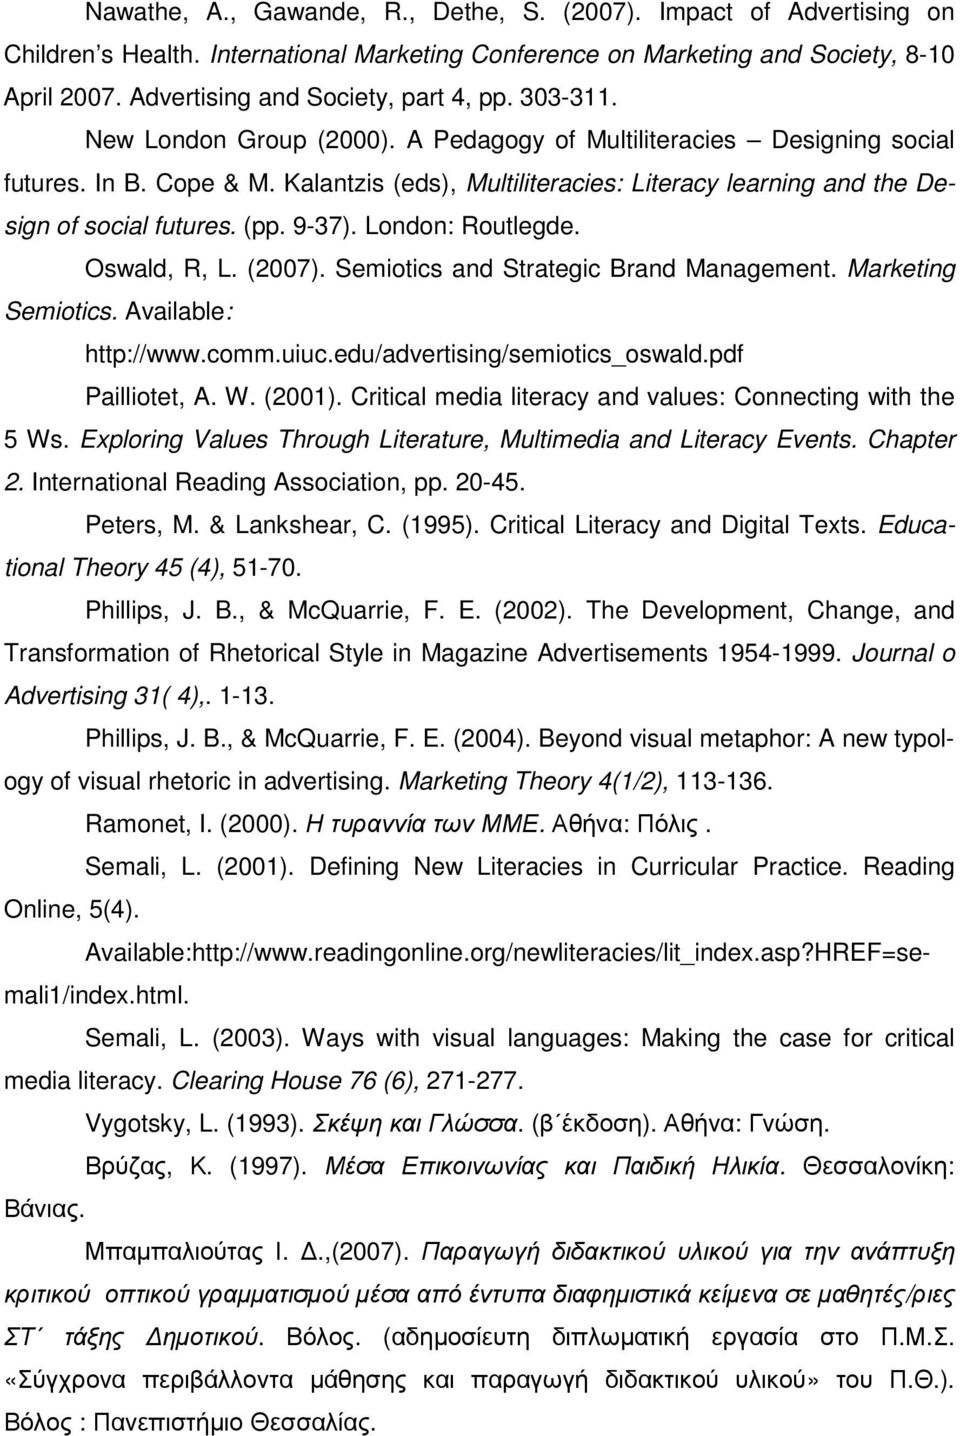 Kalantzis (eds), Multiliteracies: Literacy learning and the Design of social futures. (pp. 9-37). London: Routlegde. Oswald, R, L. (2007). Semiotics and Strategic Brand Management.